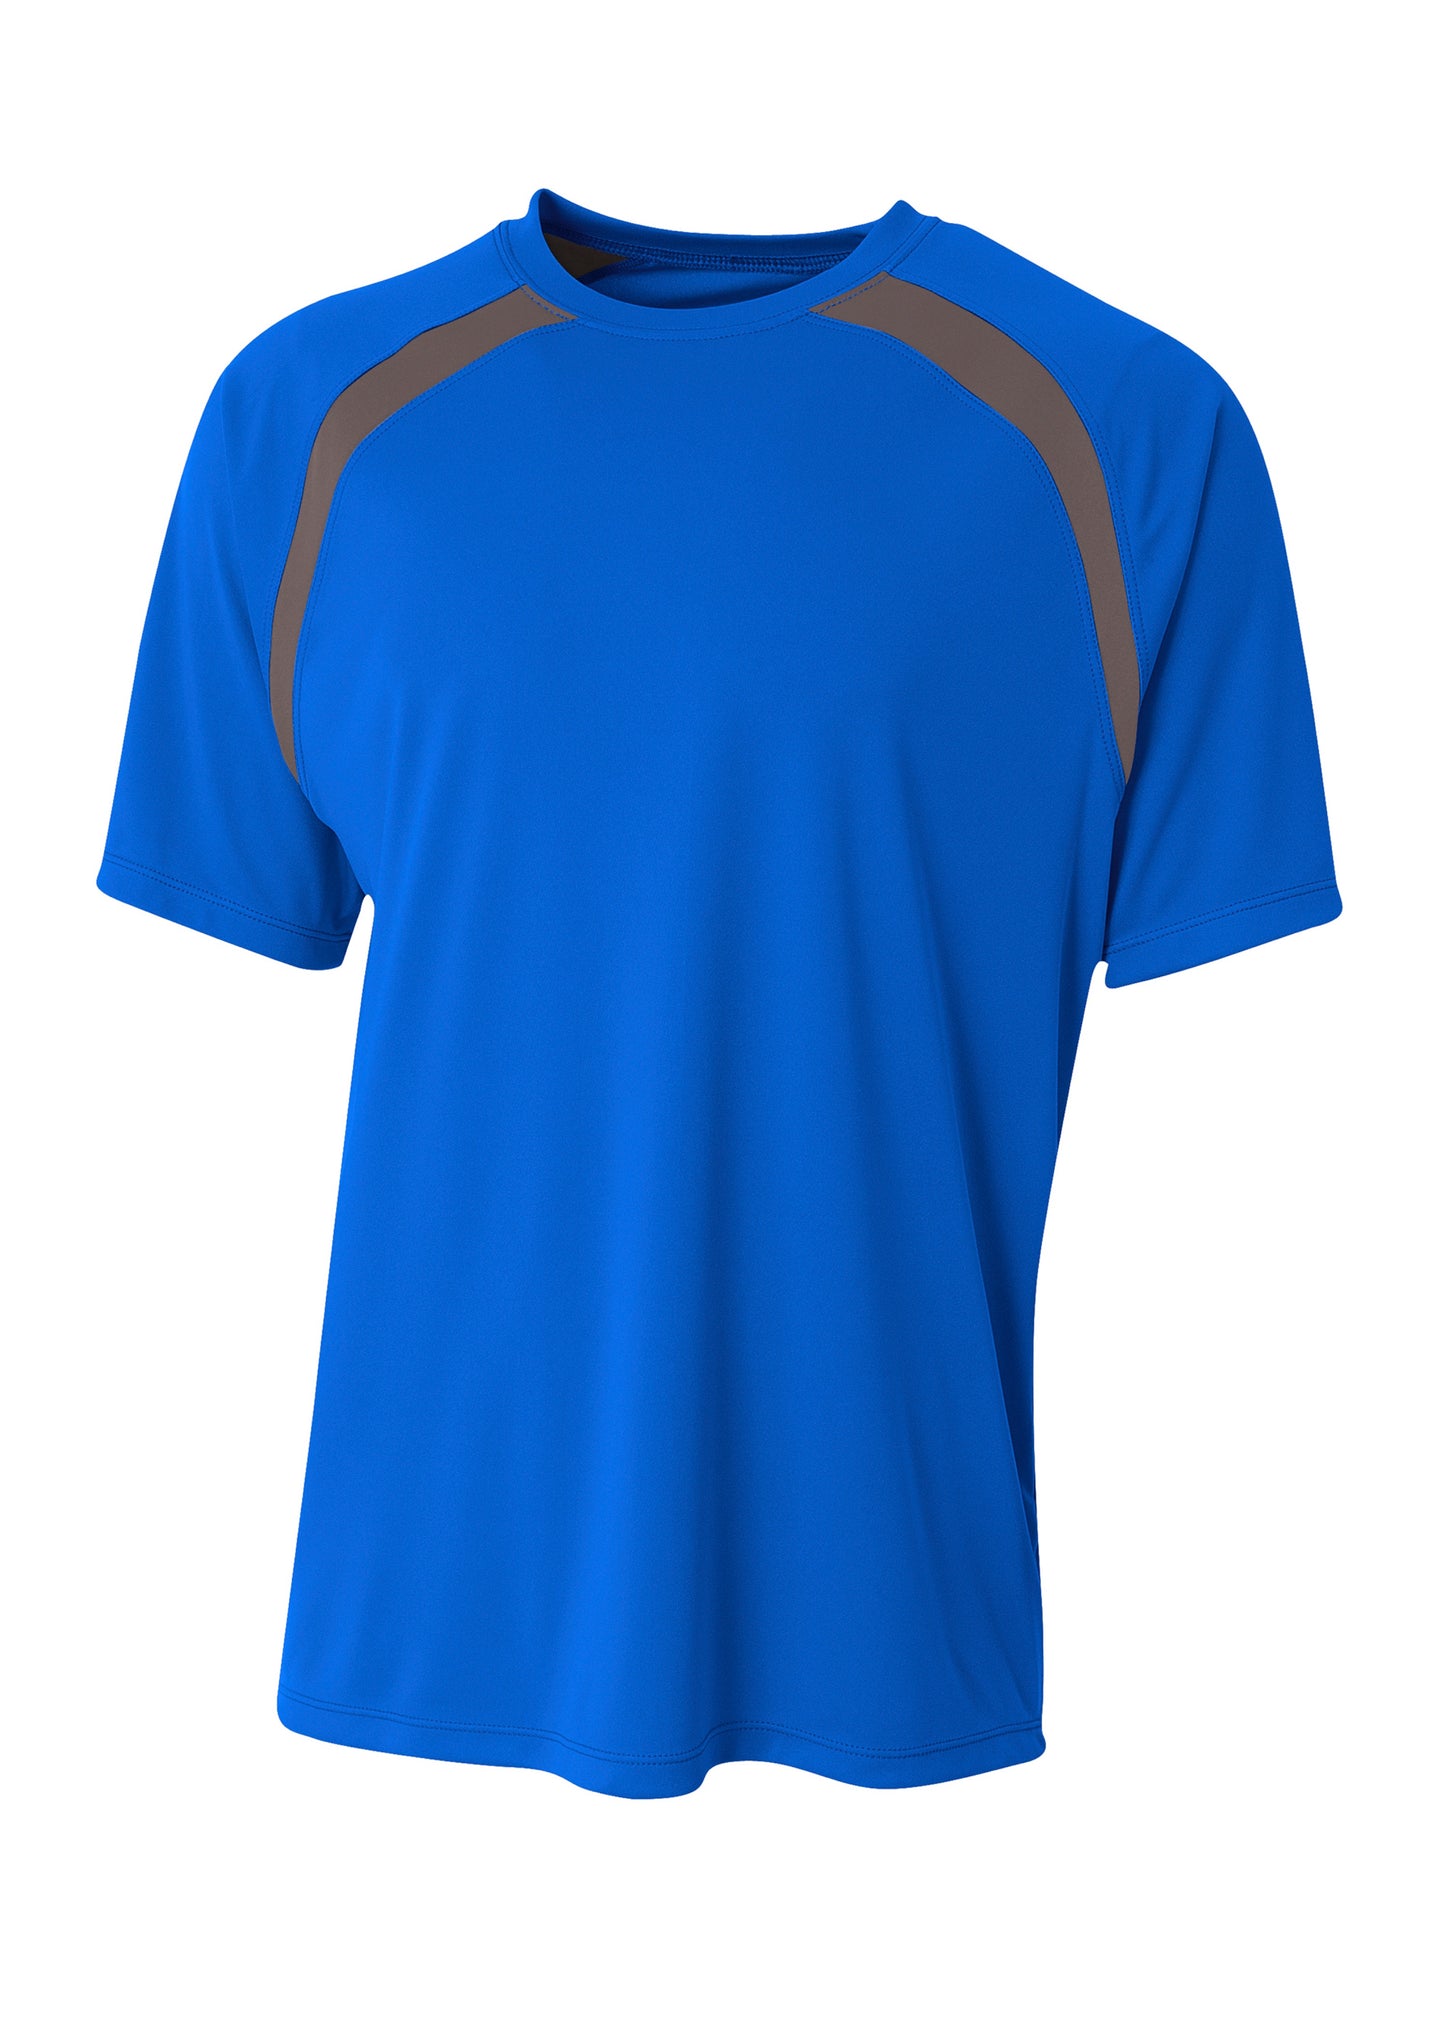 Photo of A4 SHIRTS N3001  color  ROYAL/GRAPHITE